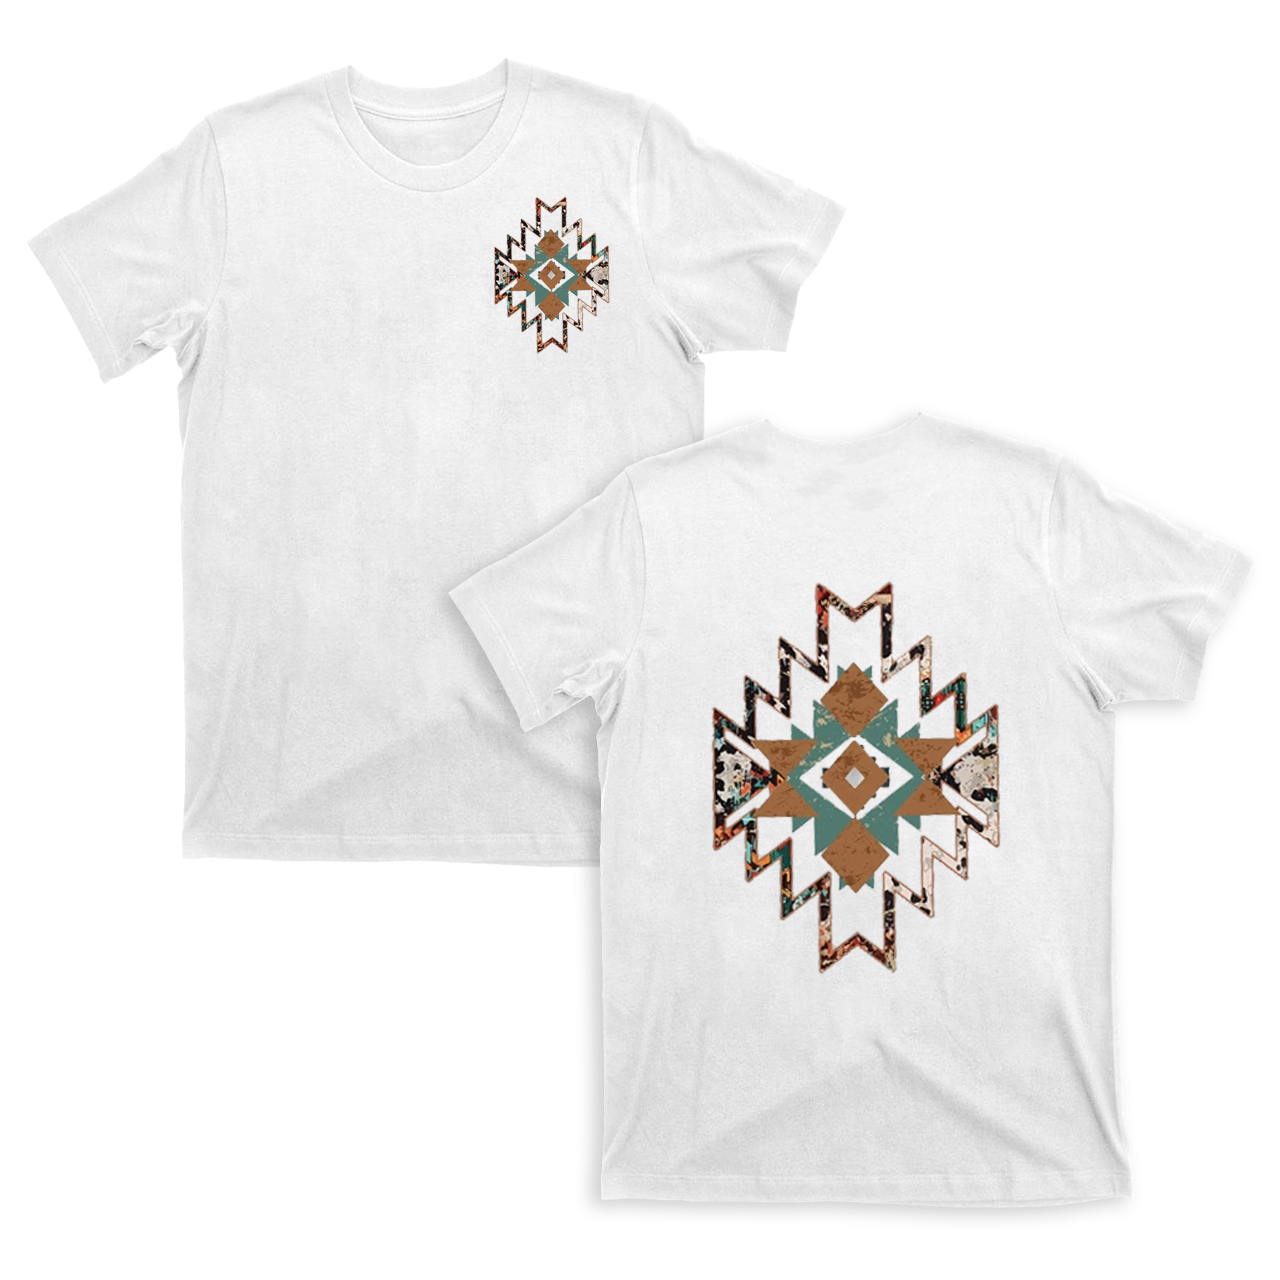 Cowboy Aztec Double sided printing T-Shirts